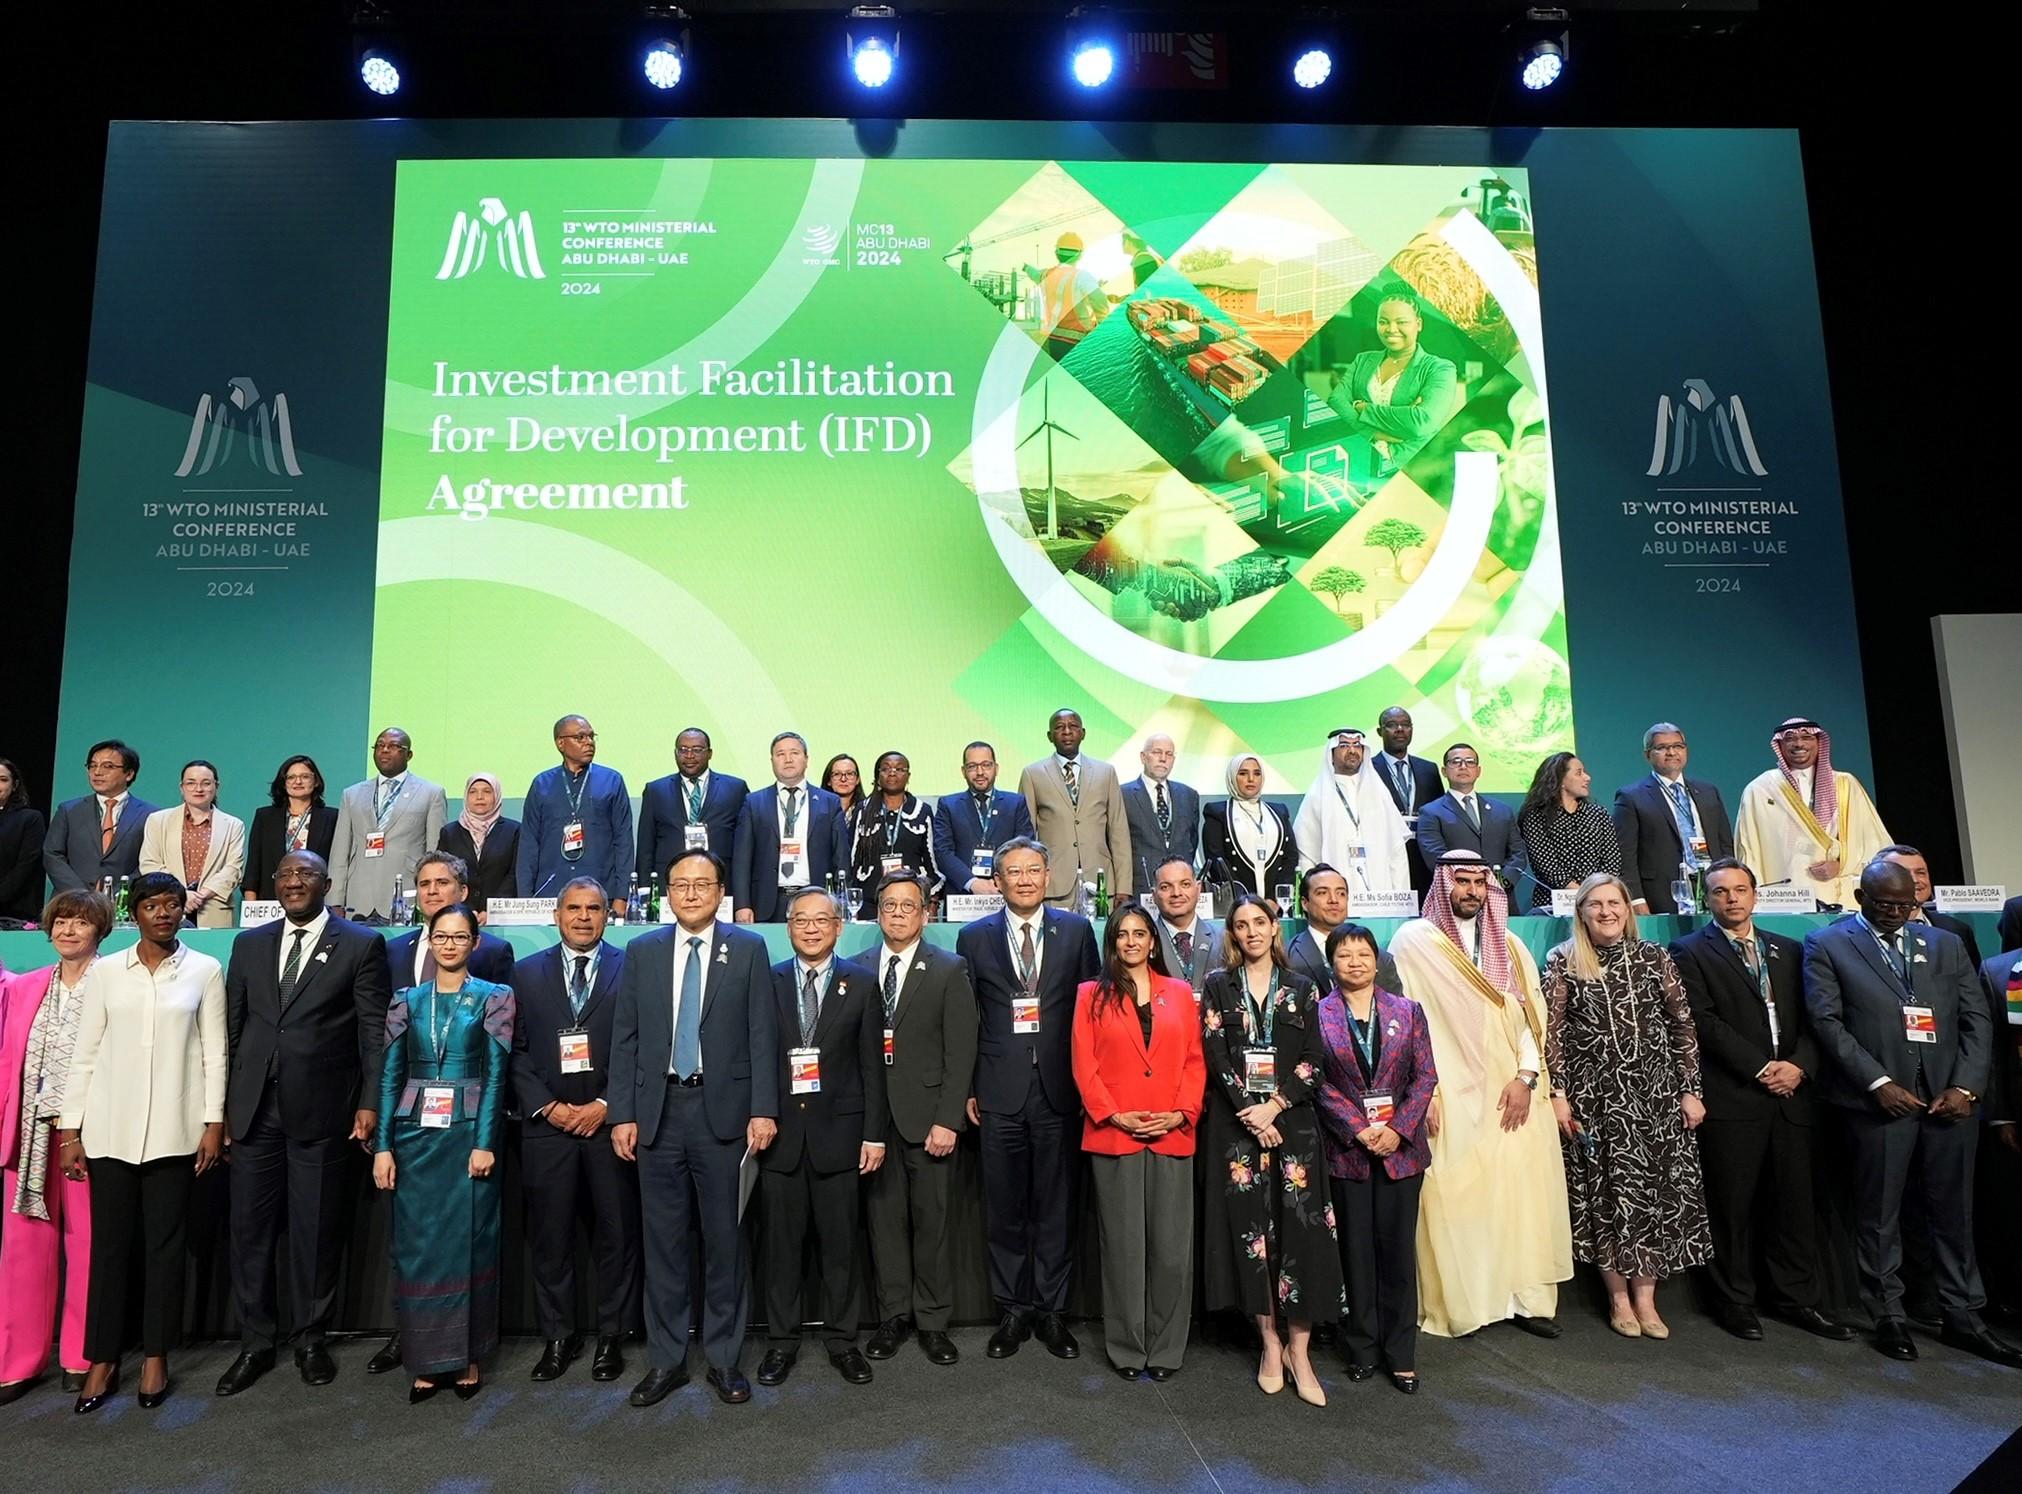 The Secretary for Commerce and Economic Development, Mr Algernon Yau (first row, ninth left), attended an event to mark the finalisation of the Investment Facilitation for Development Agreement on the sidelines of the 13th World Trade Organization Ministerial Conference in Abu Dhabi, the United Arab Emirates, on February 25 (Abu Dhabi time).